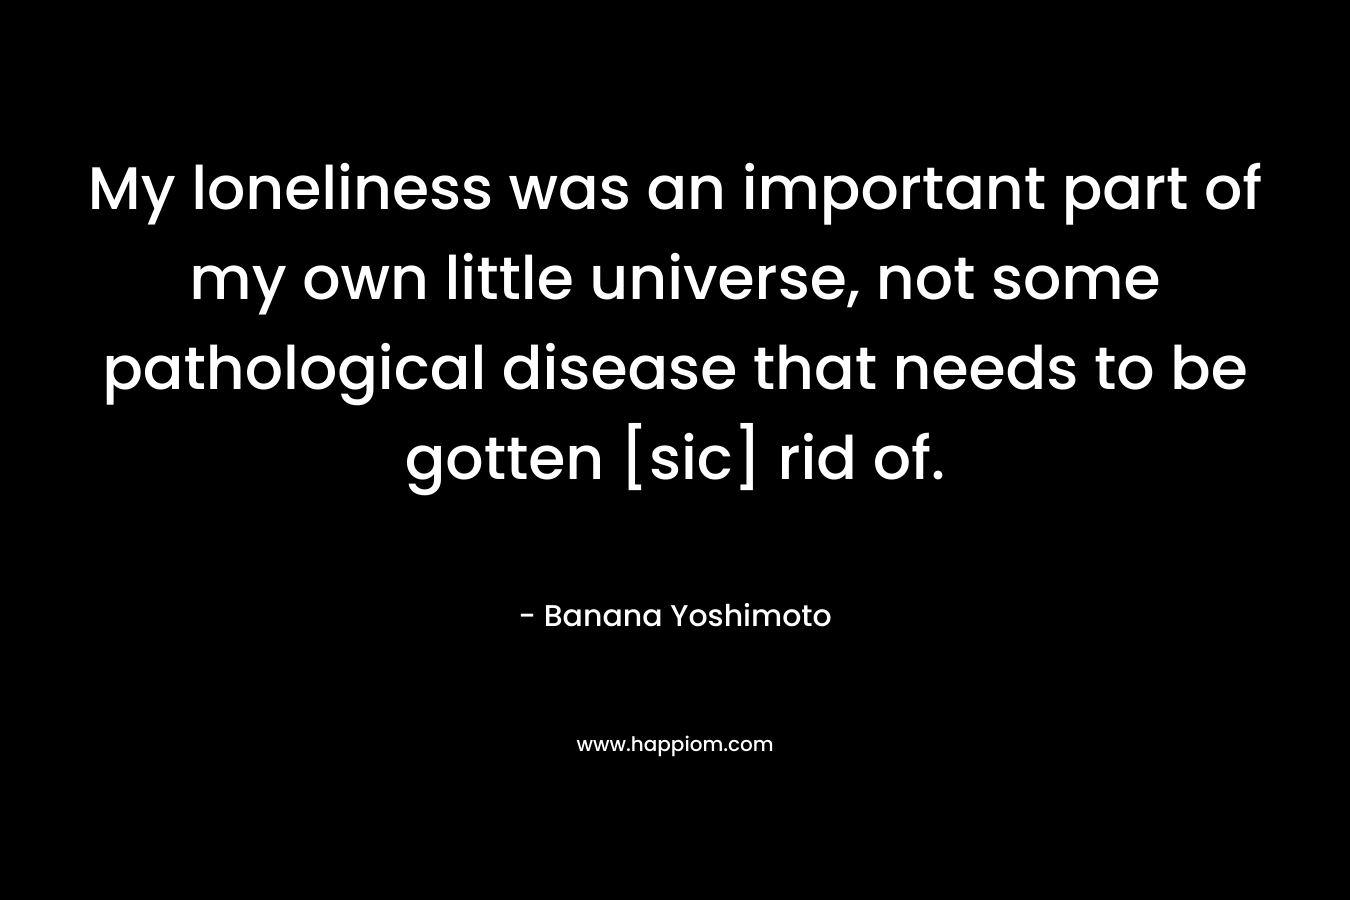 My loneliness was an important part of my own little universe, not some pathological disease that needs to be gotten [sic] rid of.